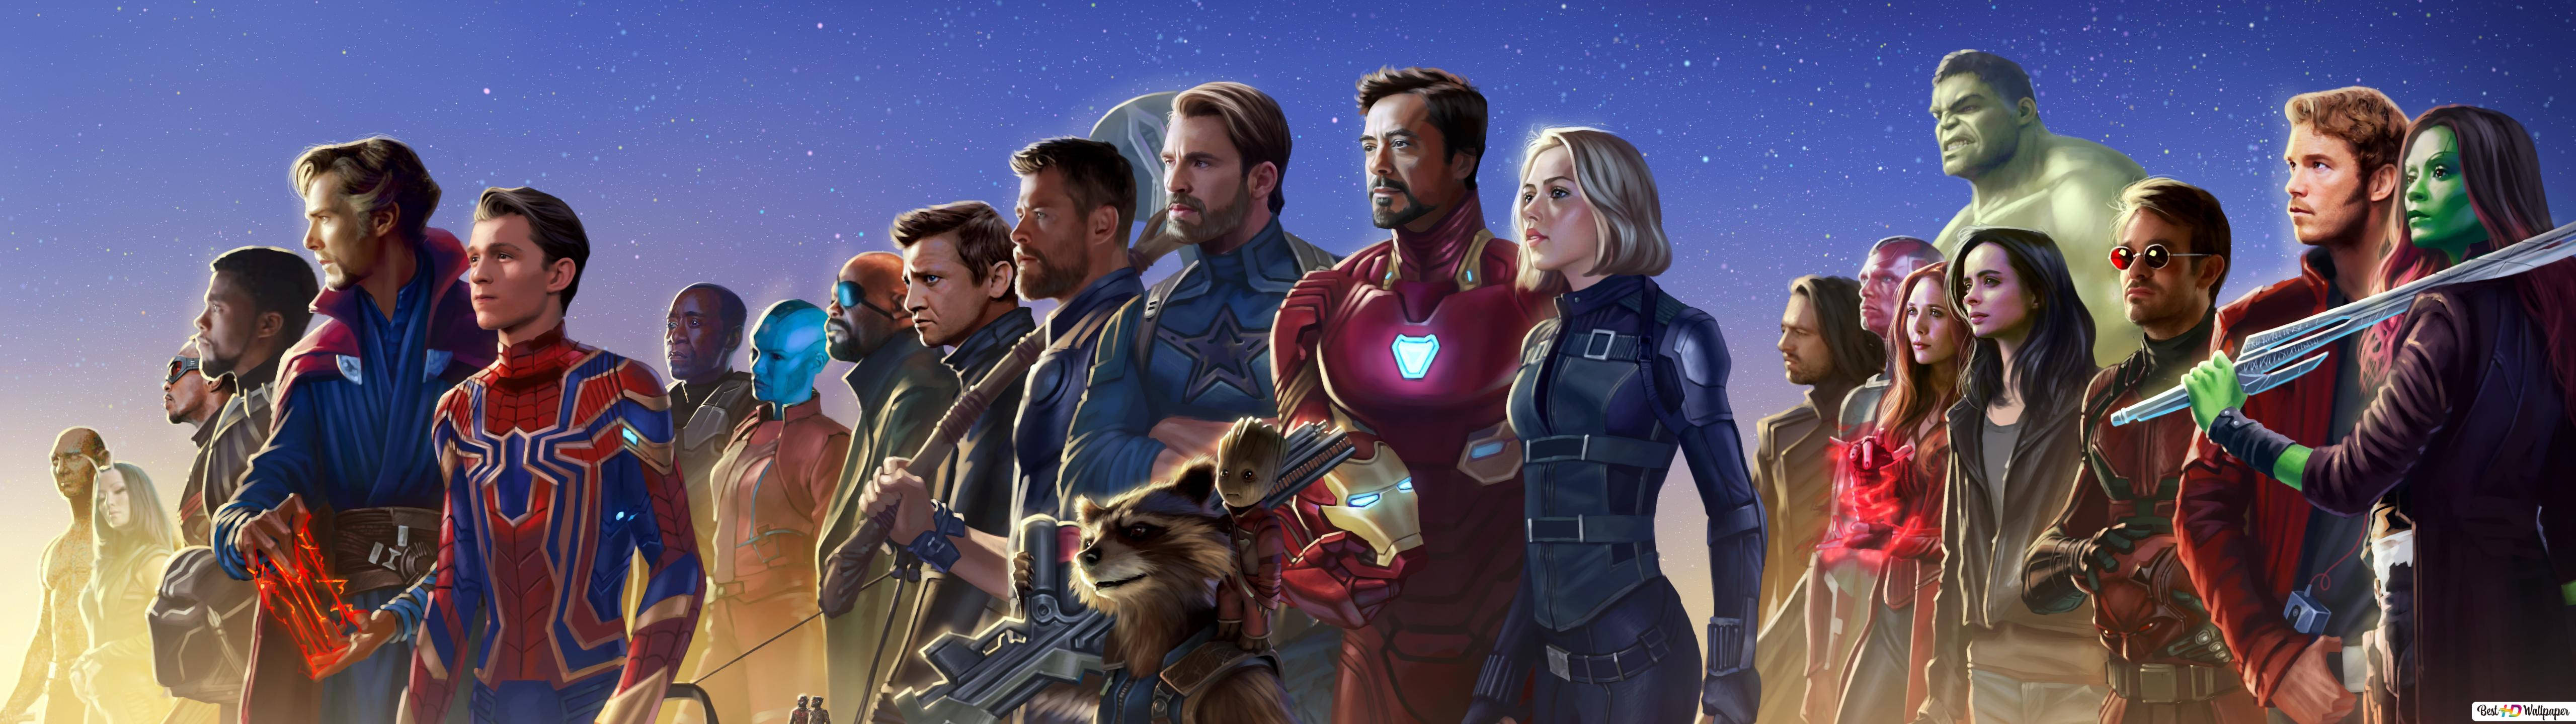 Marvel The Endgame Characters 5120 X 1440 Wallpaper